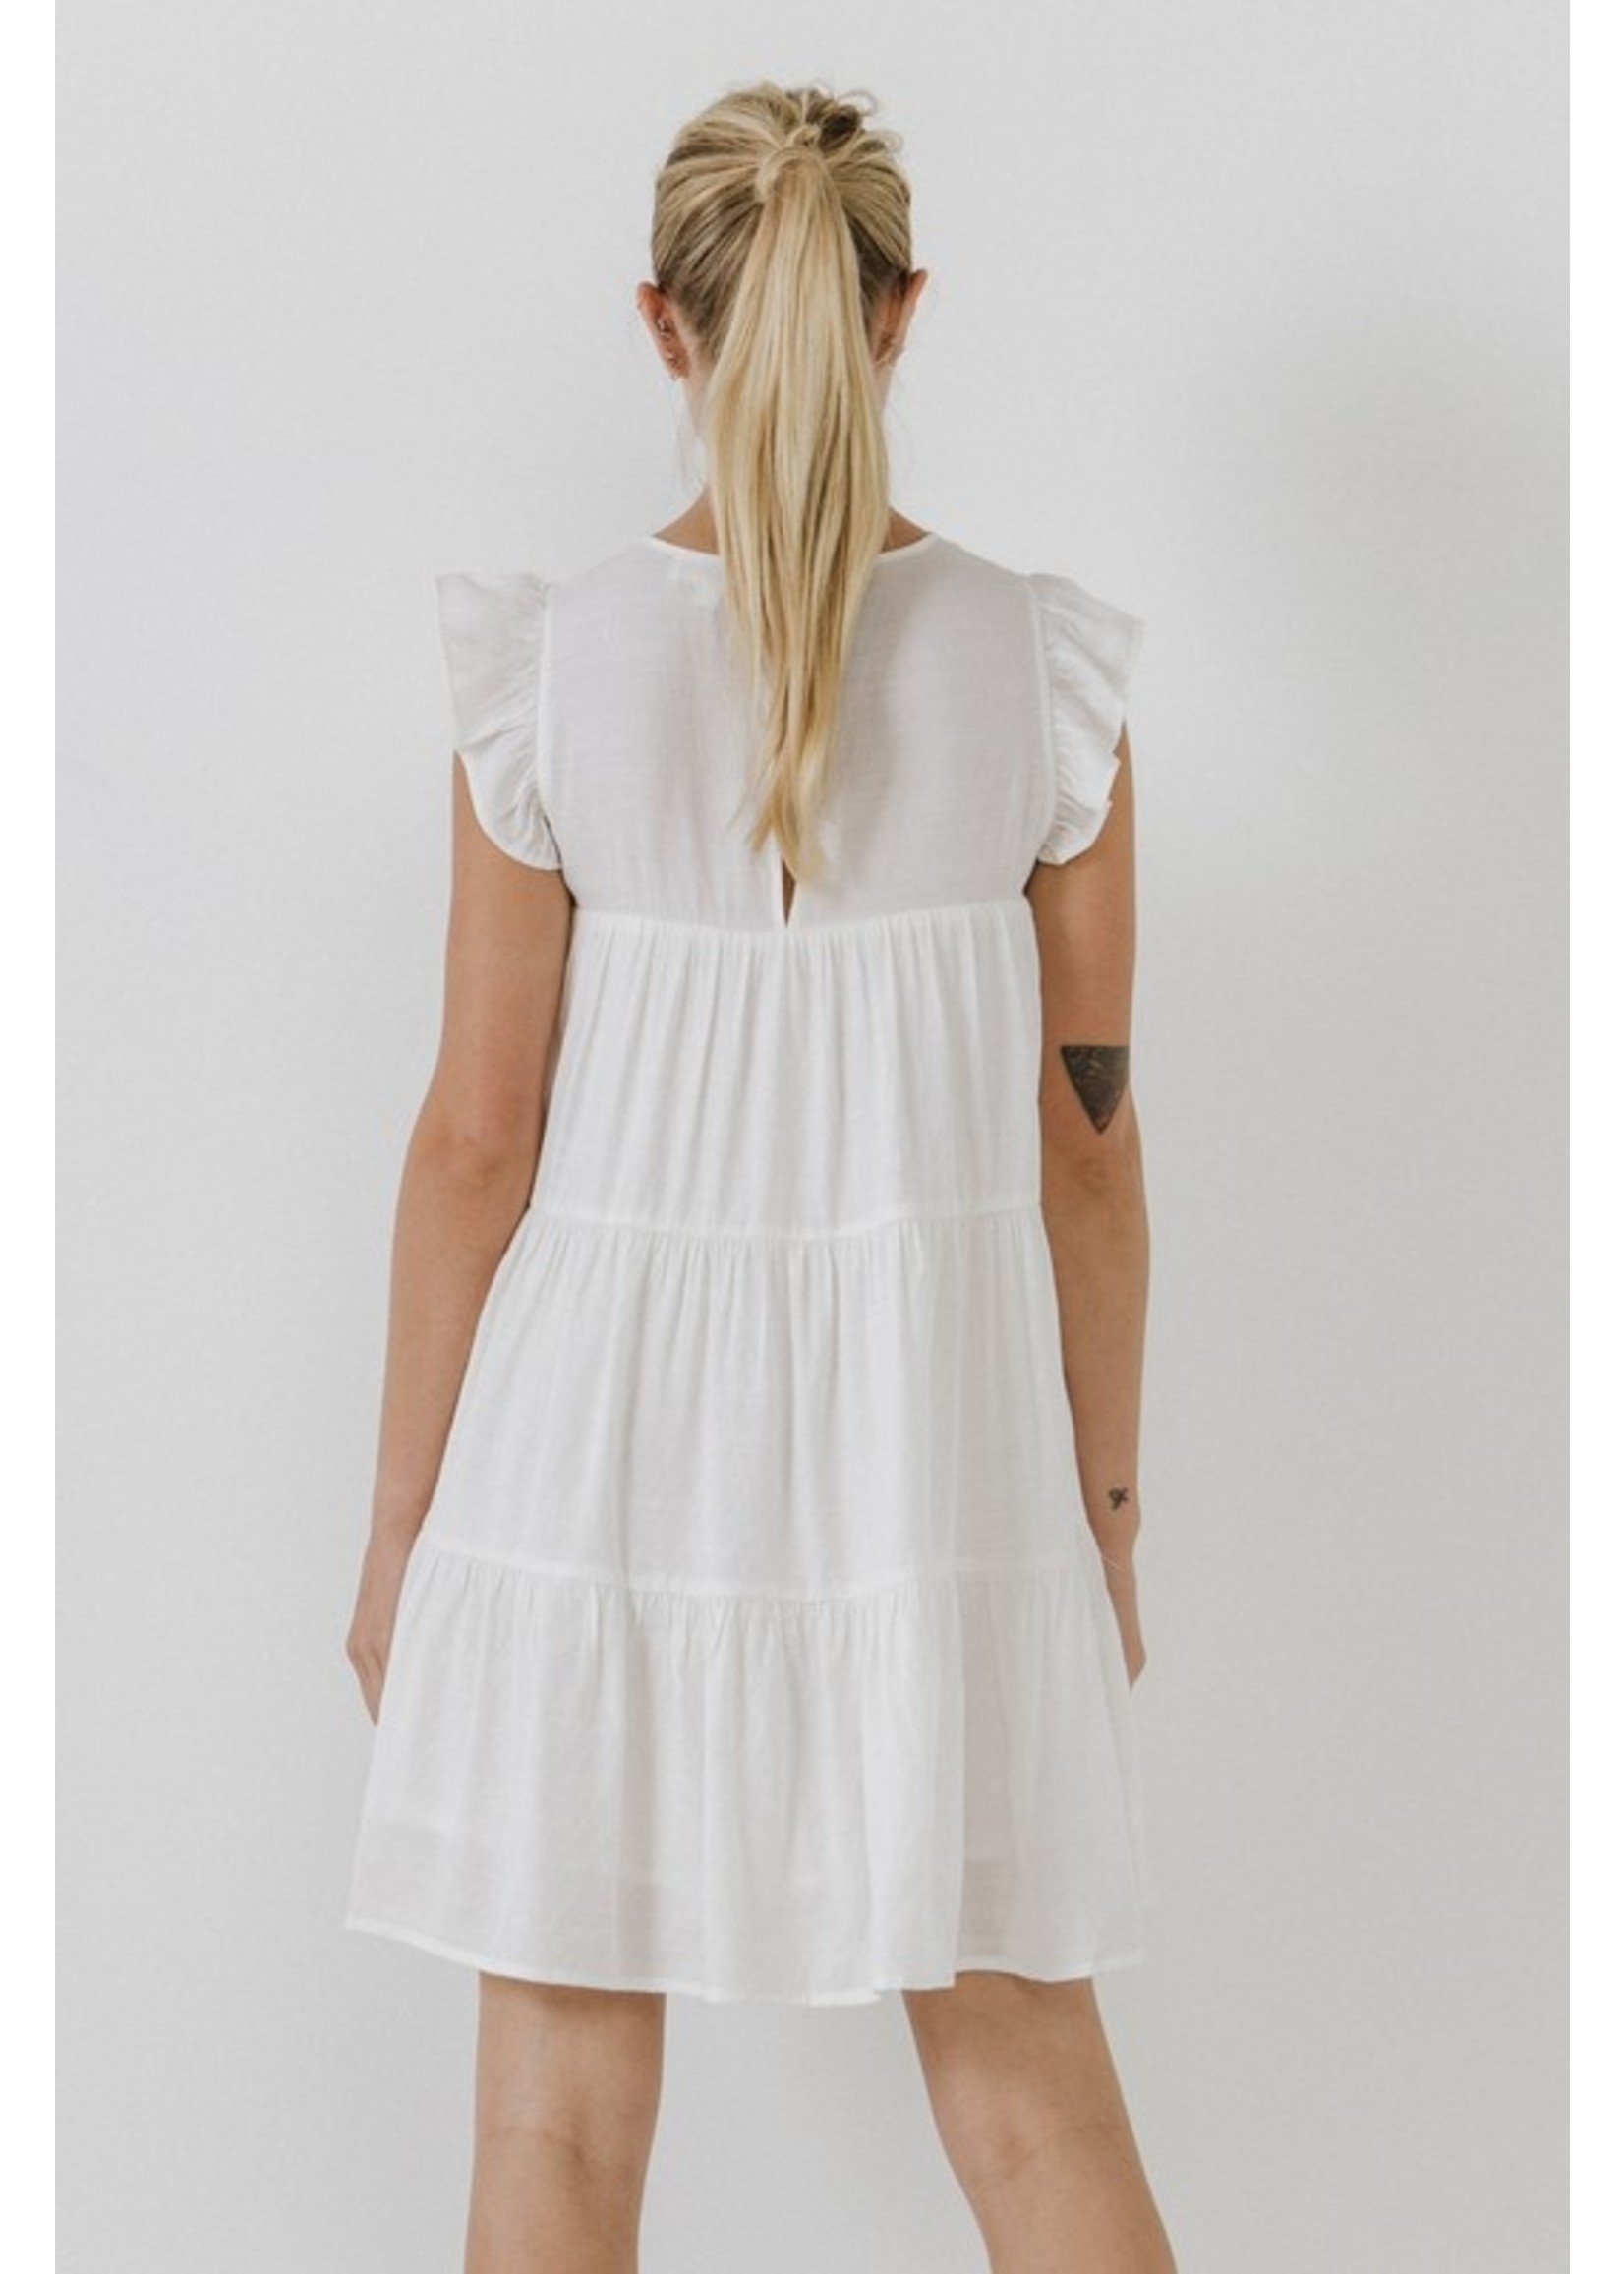 After Market Ruffled Tiered Dress